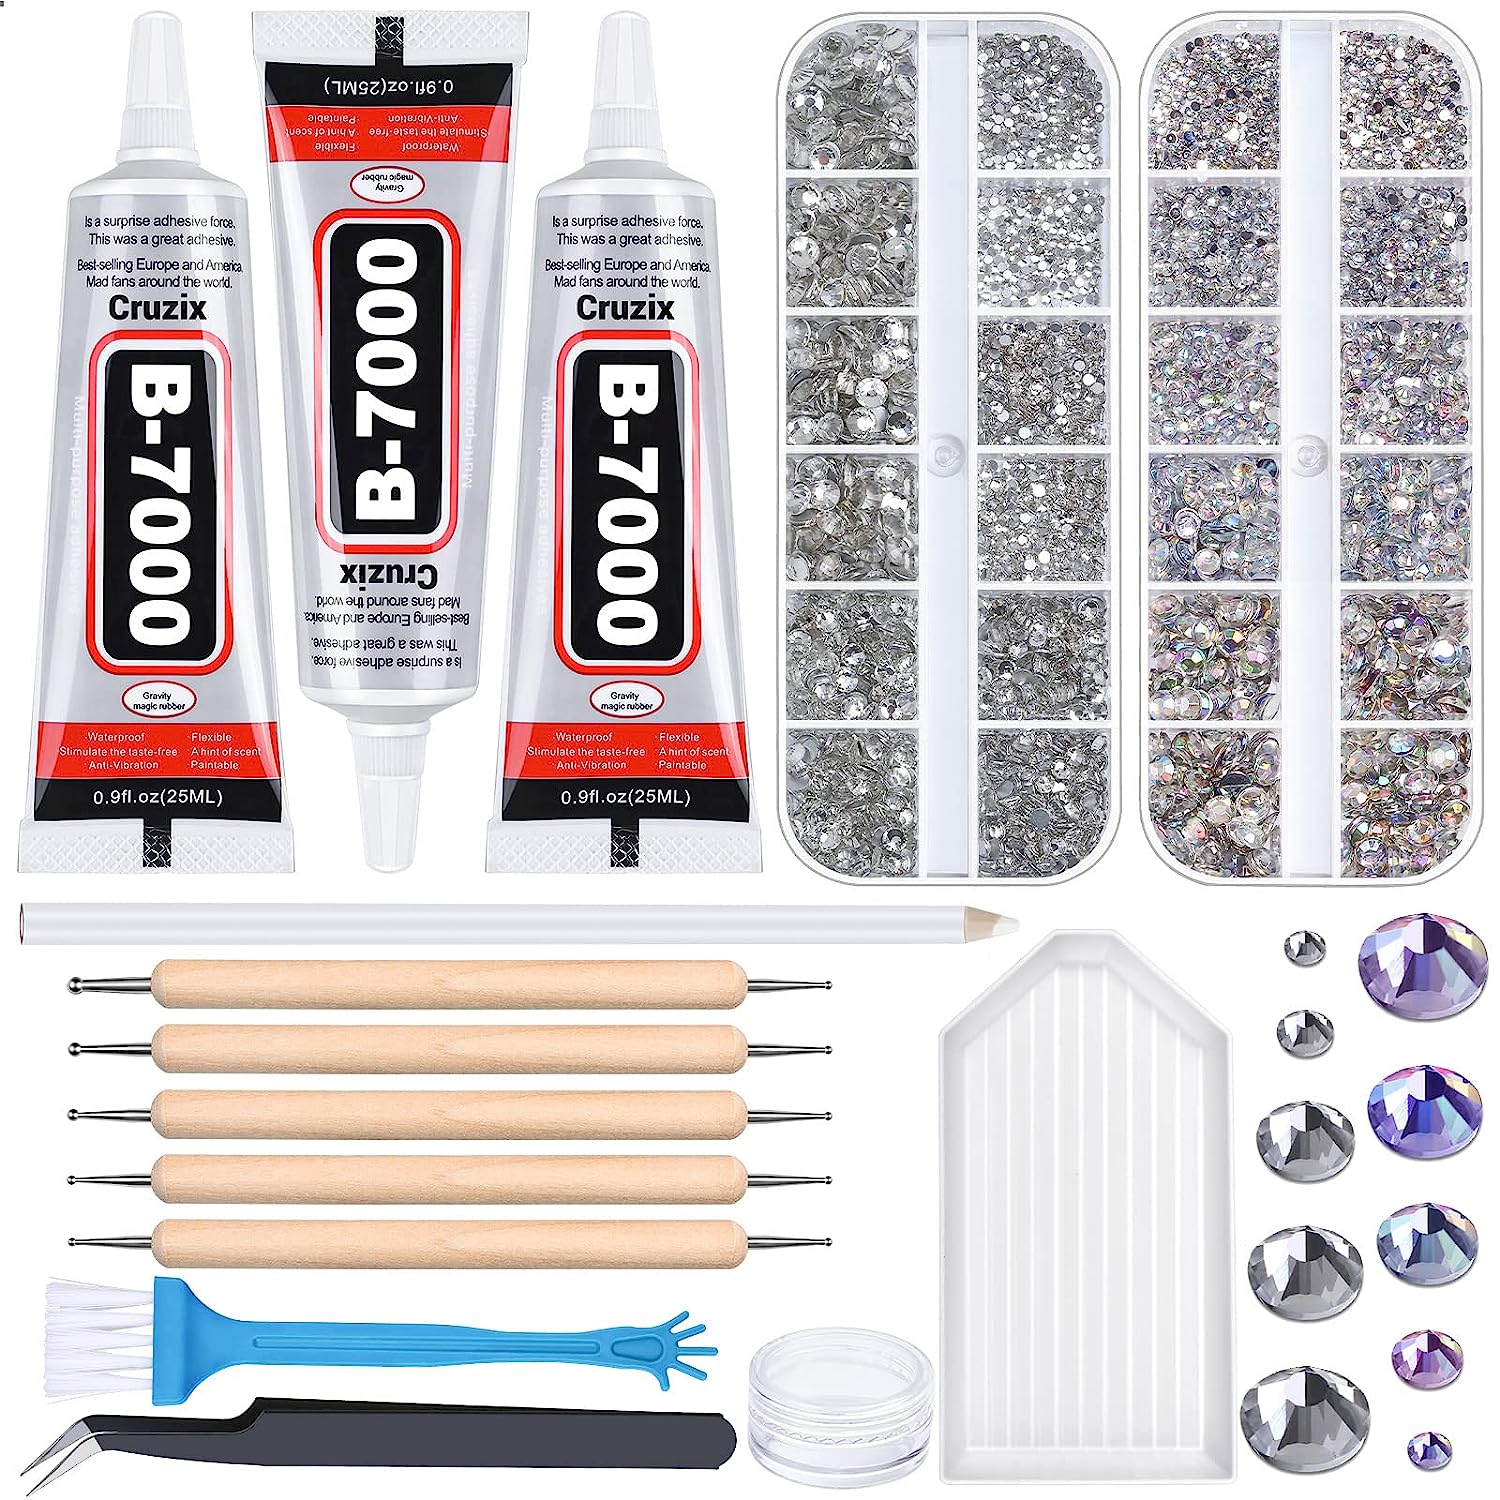 B7000 Clear Glue Bedazzler Kit with Rhinestones, [...]